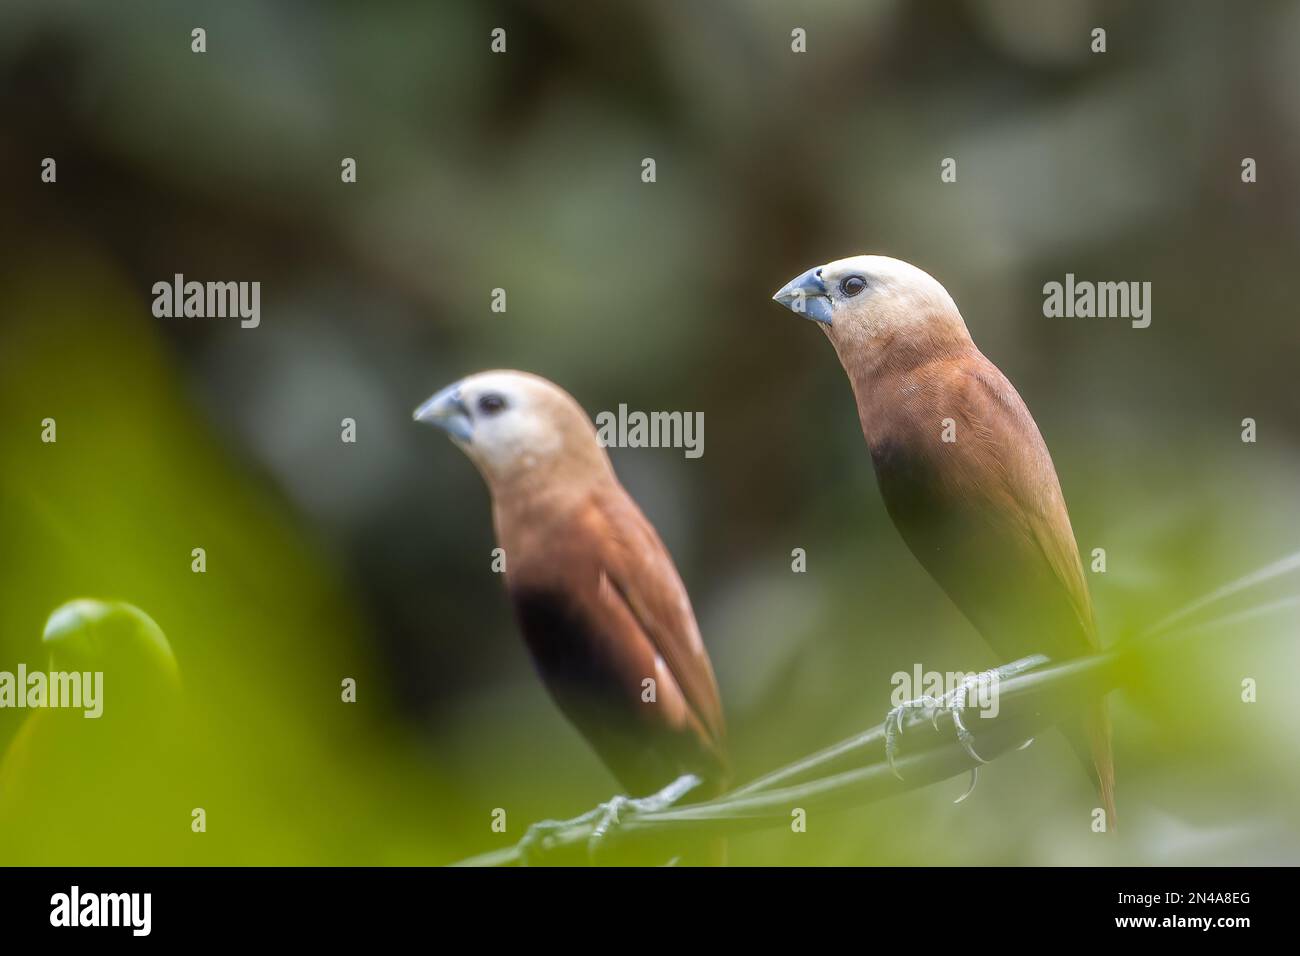 A pair of white headed Estrildidae sparrows or estrildid finches perched on a power line swaying in the wind, blurred green leaves background Stock Photo